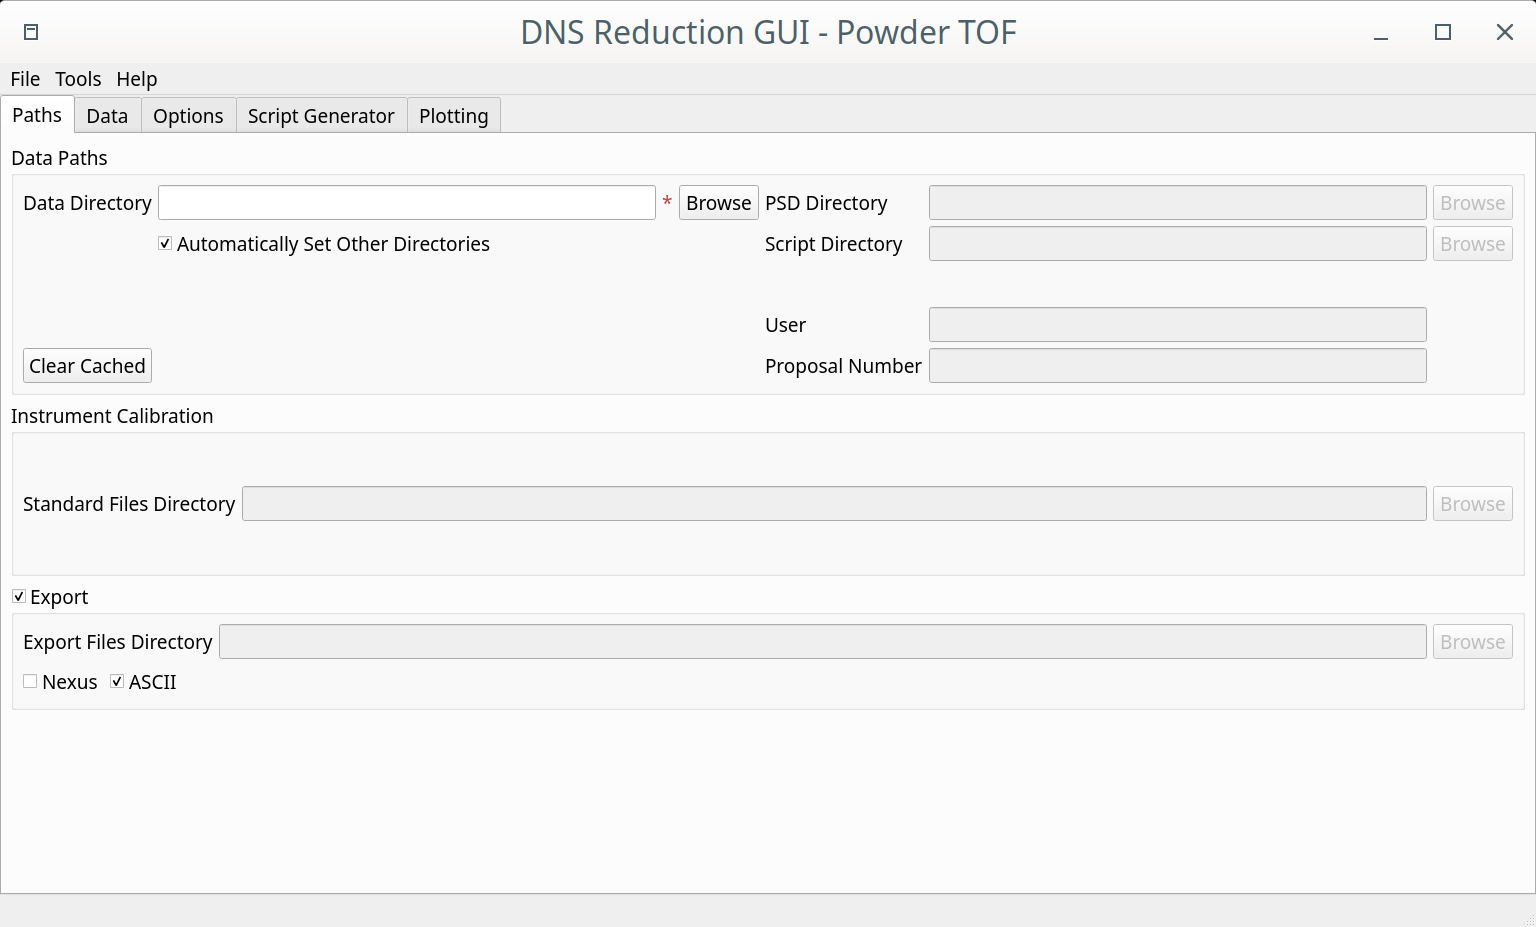 ../../../_images/DNS_interface_powder_tof_overview.png